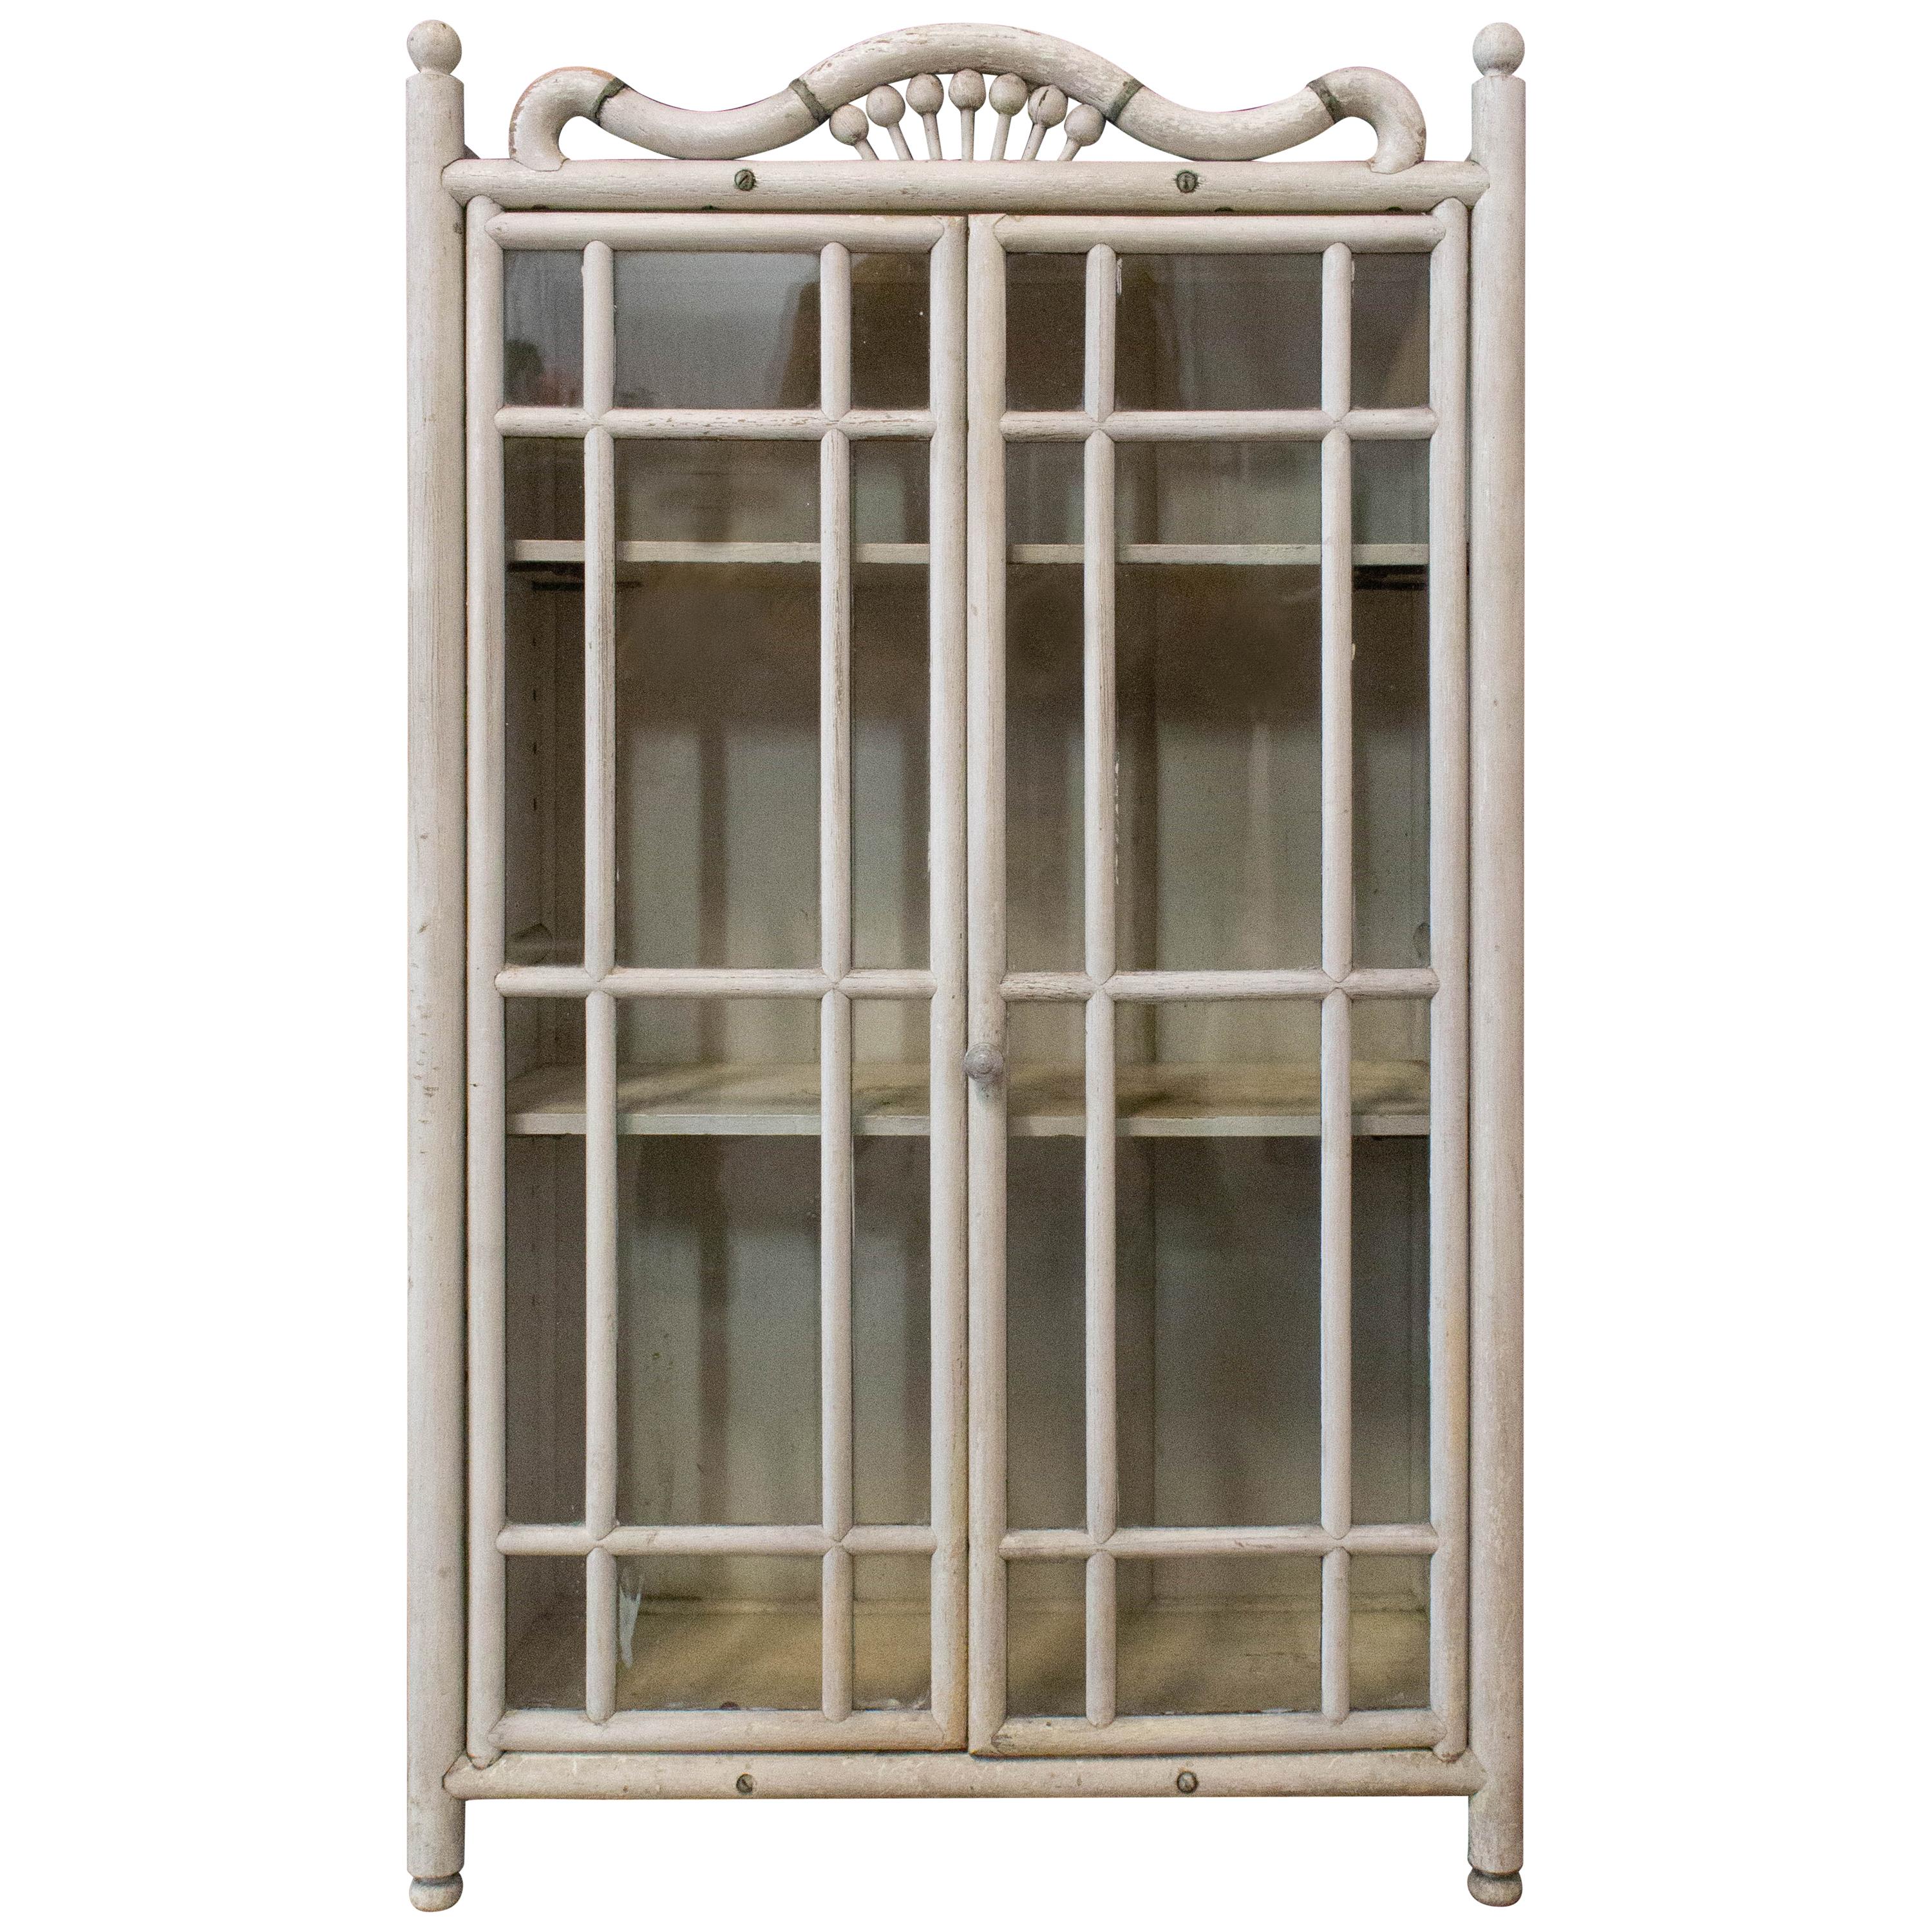 French Petite Vitrine Beveled Glass or Hanging Cabinet, Early 20th Century